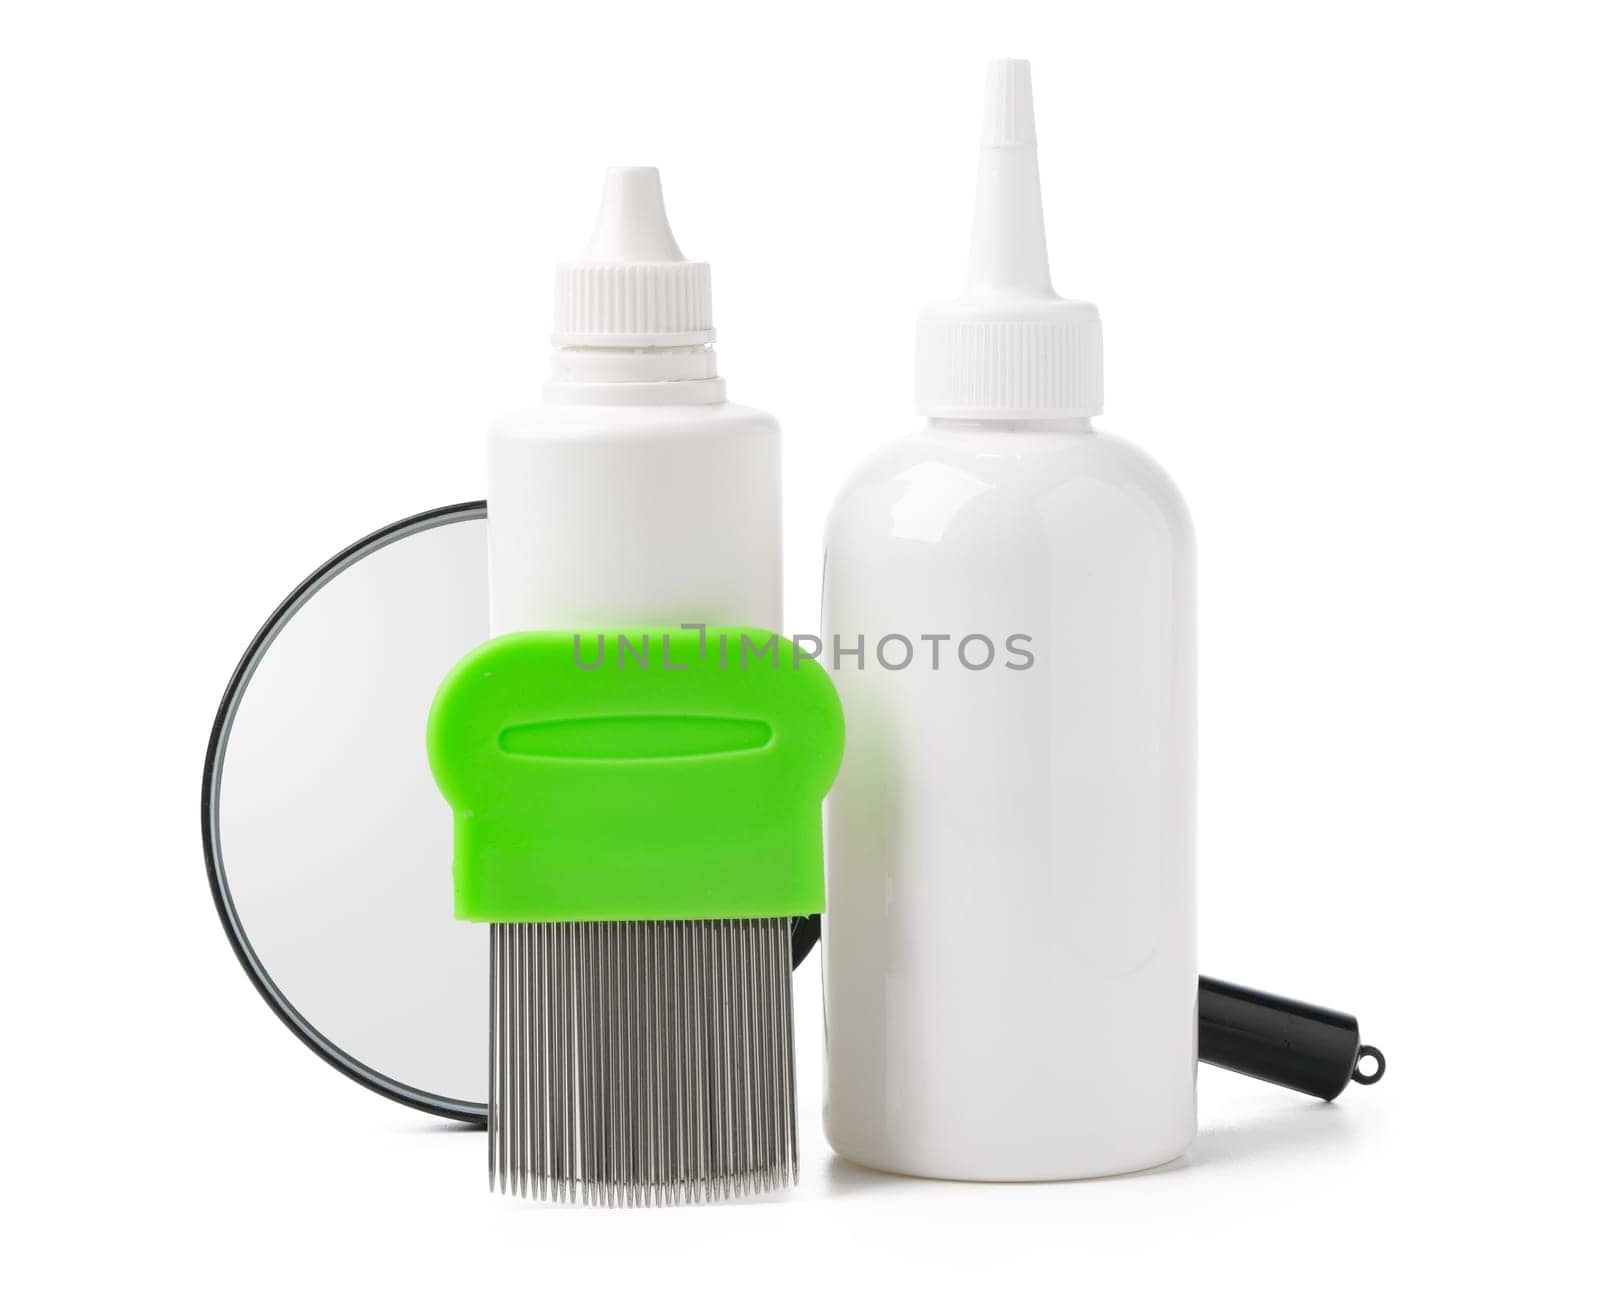 Medicine, lice comb and magnifying glass isolated on white background